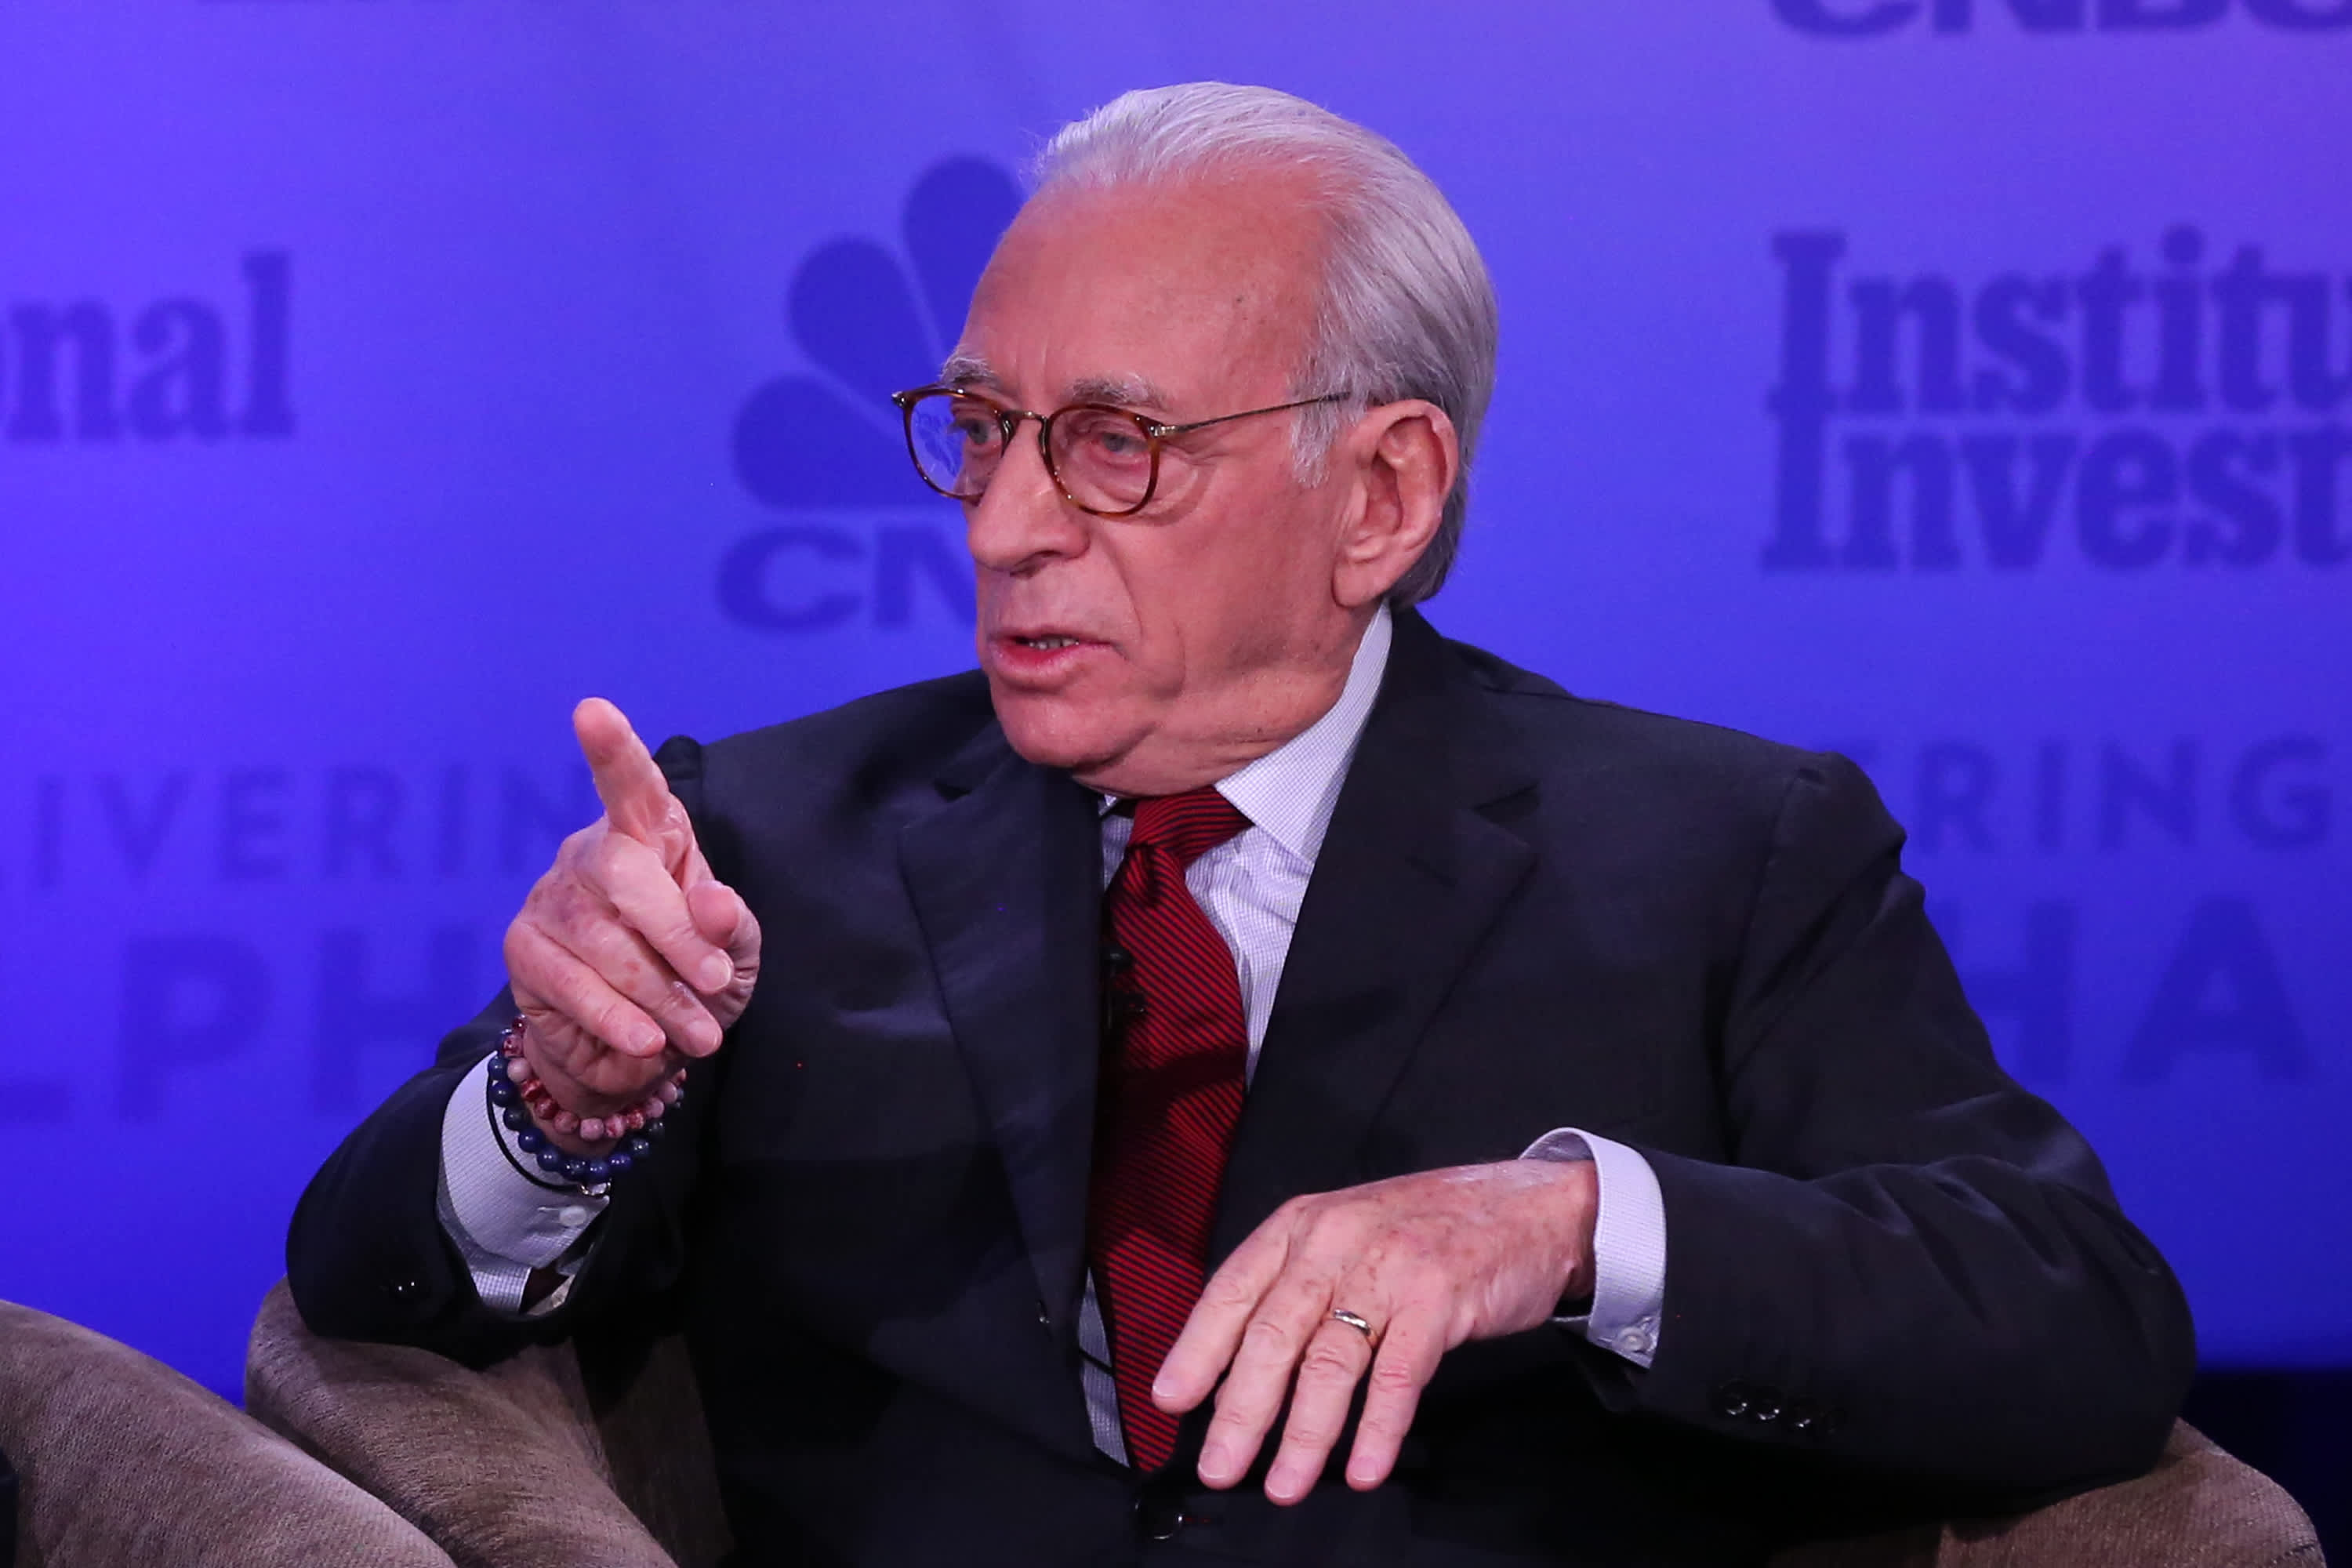 Disney could use an activist investor like Nelson Peltz to help put its financial house in order